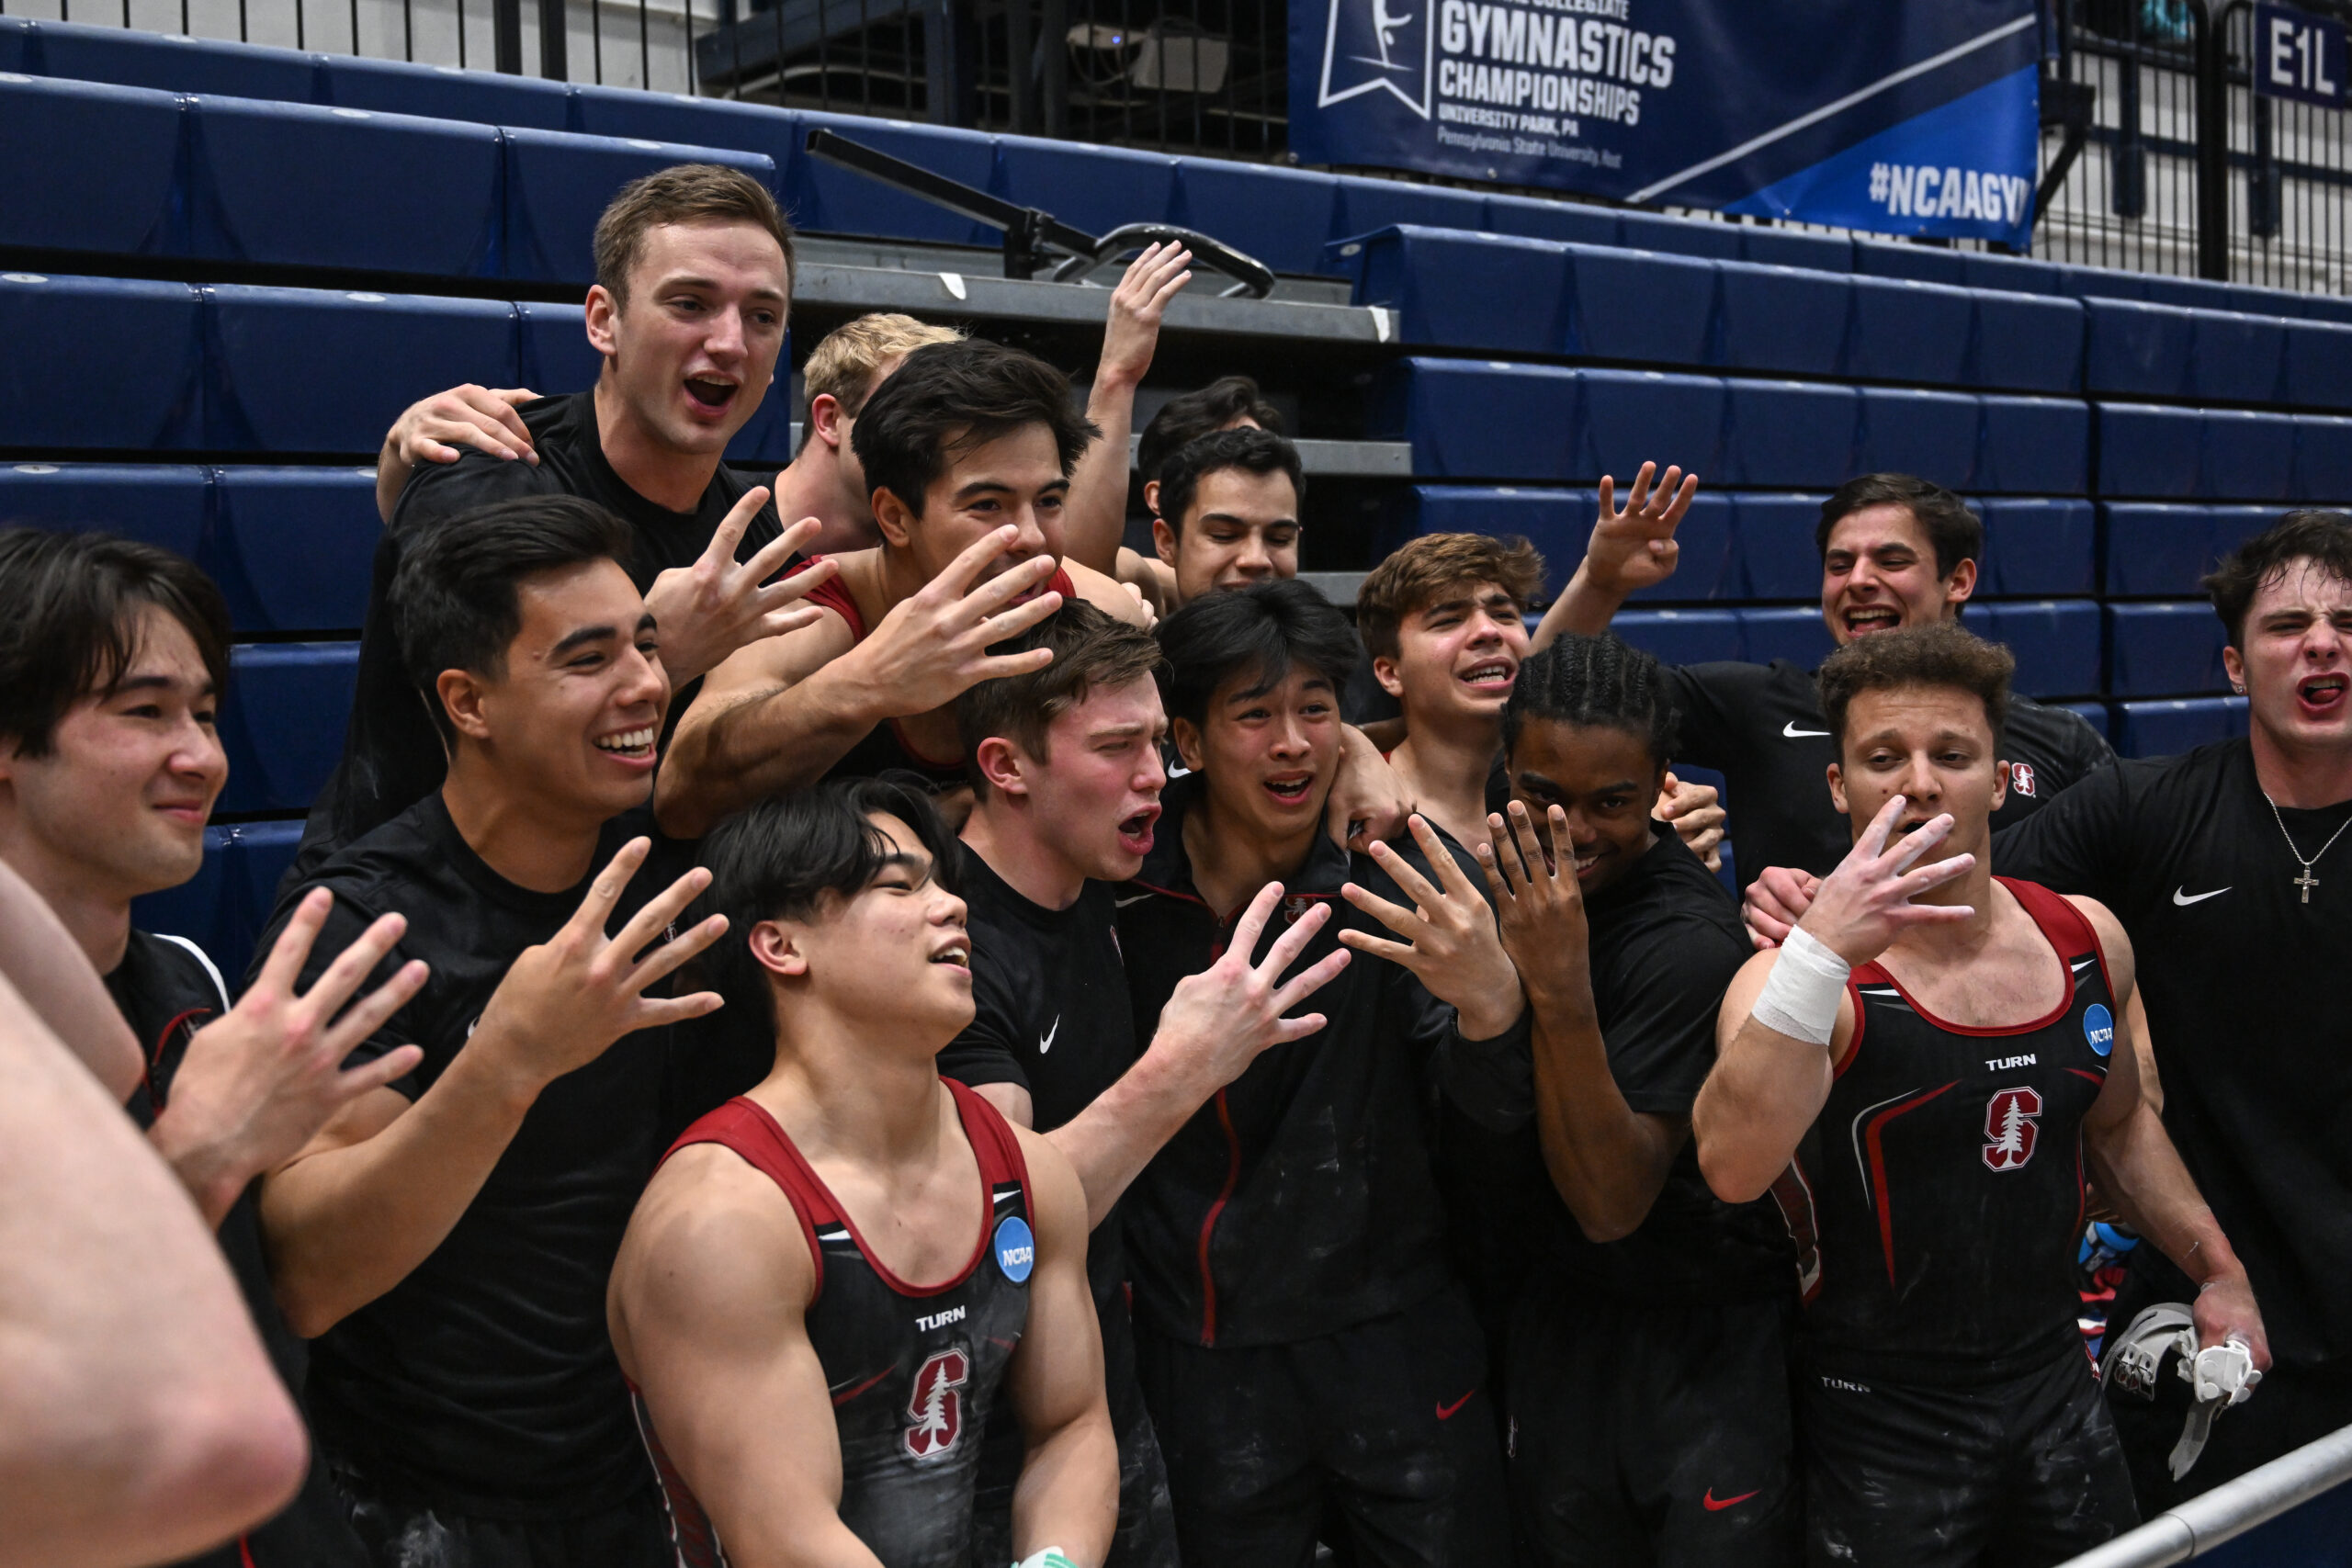 The Stanford men's gymnastics team celebrates its fourth straight title at the 2023 NCAA Men's Gymnastics Championships.